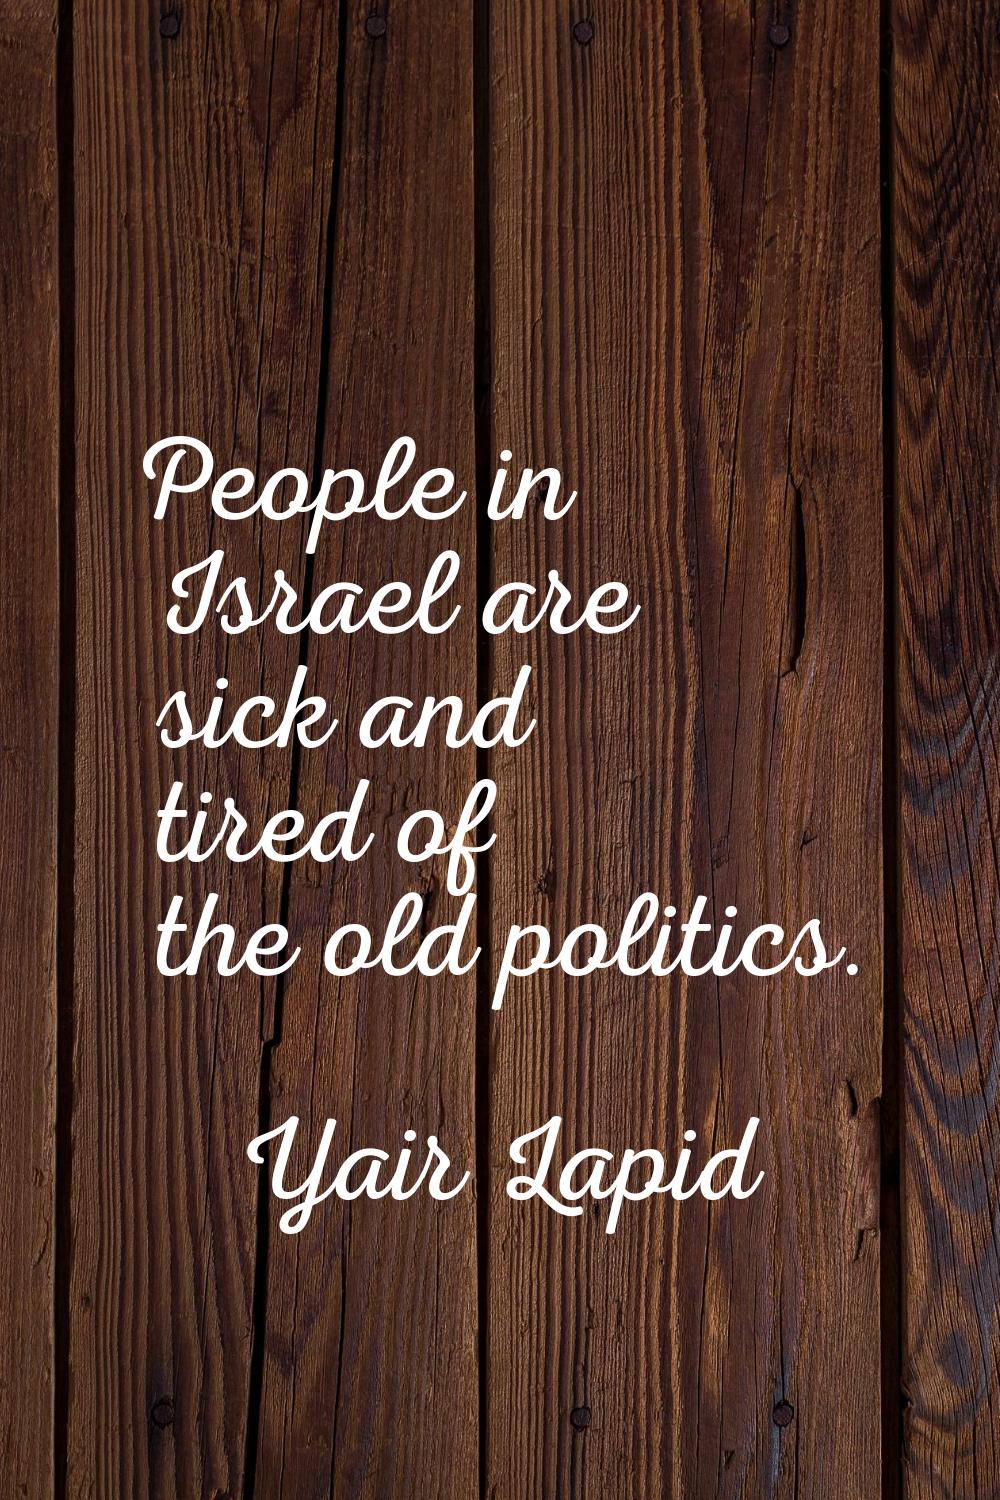 People in Israel are sick and tired of the old politics.